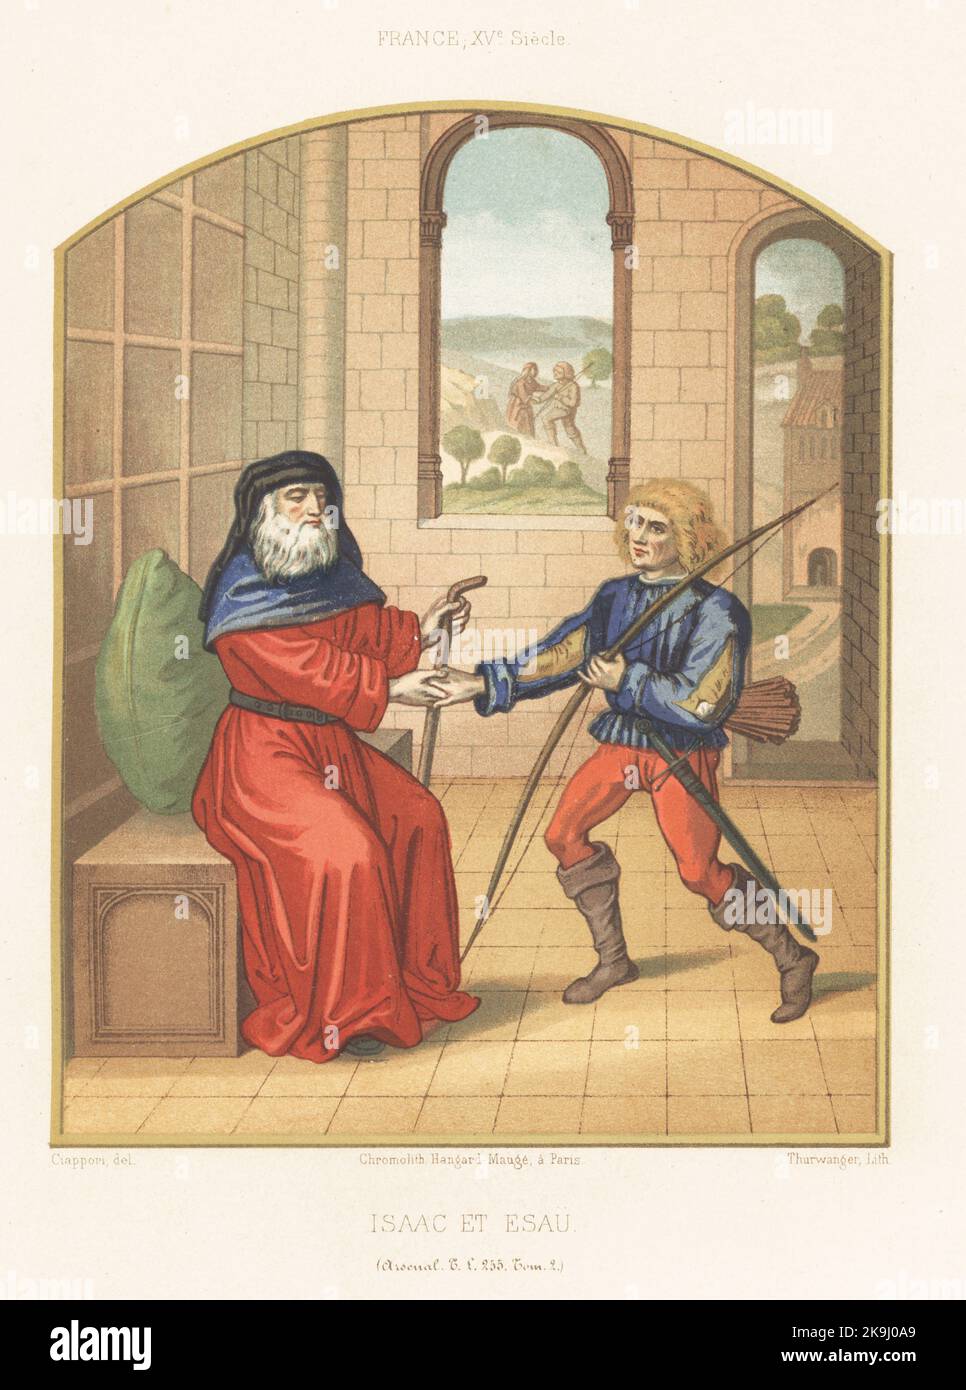 Isaac and his son Esau in 15th century French costume. Esau dressed as a hunter, in doublet, hose and boots with bow, quiver and sword. Isaac et Esau. XVe siecle. Taken from a Book of Hours, livre d'heures, MS Tl 255, Tom. 2, Bibliotheque de l'Arsenal. Chromolithograph by Thurwanger after an illustration by Claudius Joseph Ciappori from Charles Louandre’s Les Arts Somptuaires, The Sumptuary Arts, Hangard-Mauge, Paris, 1858. Stock Photo